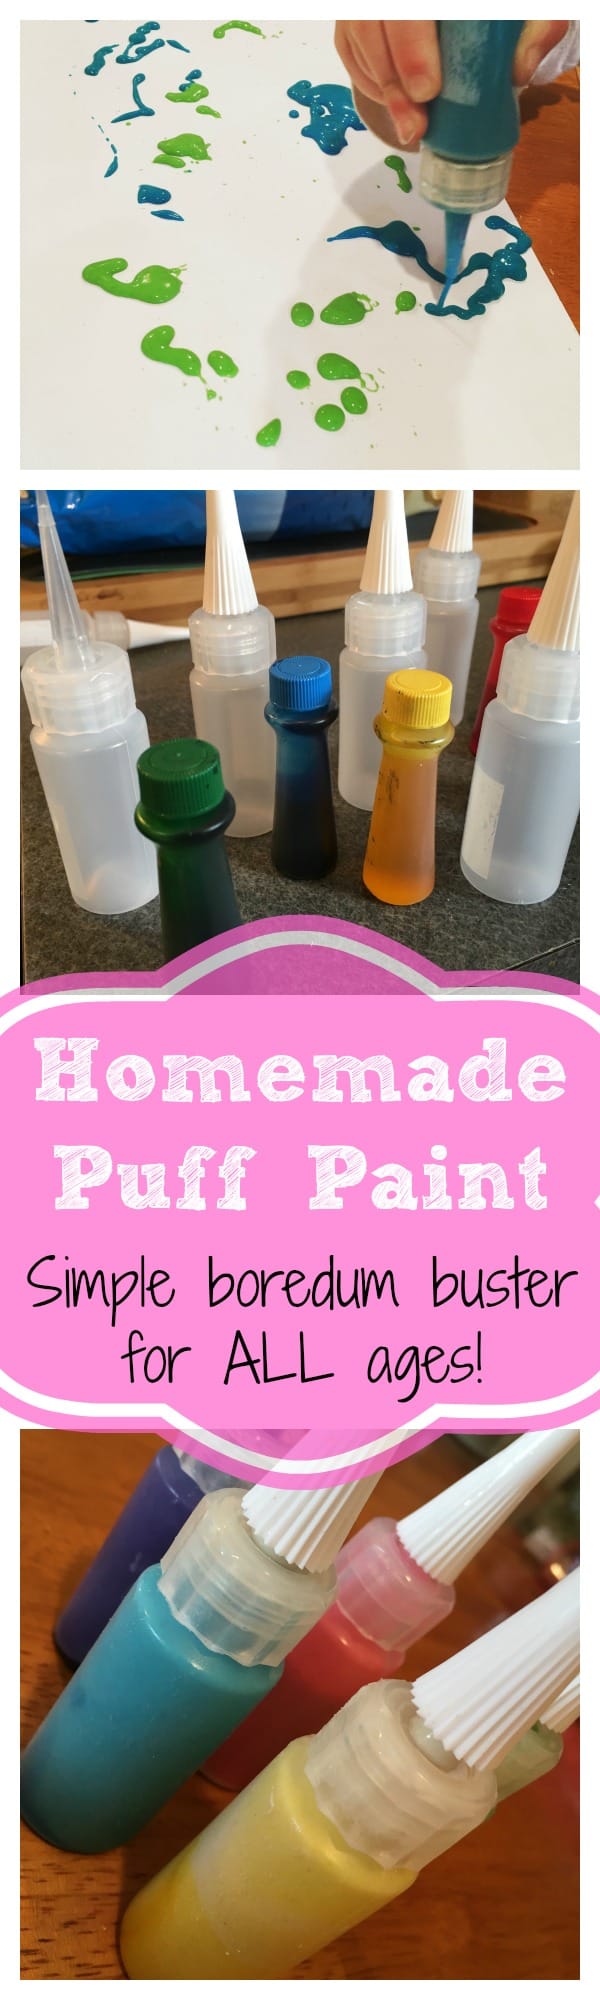 Homemade Puff Paint from Pantry Items - Views From a Step Stool